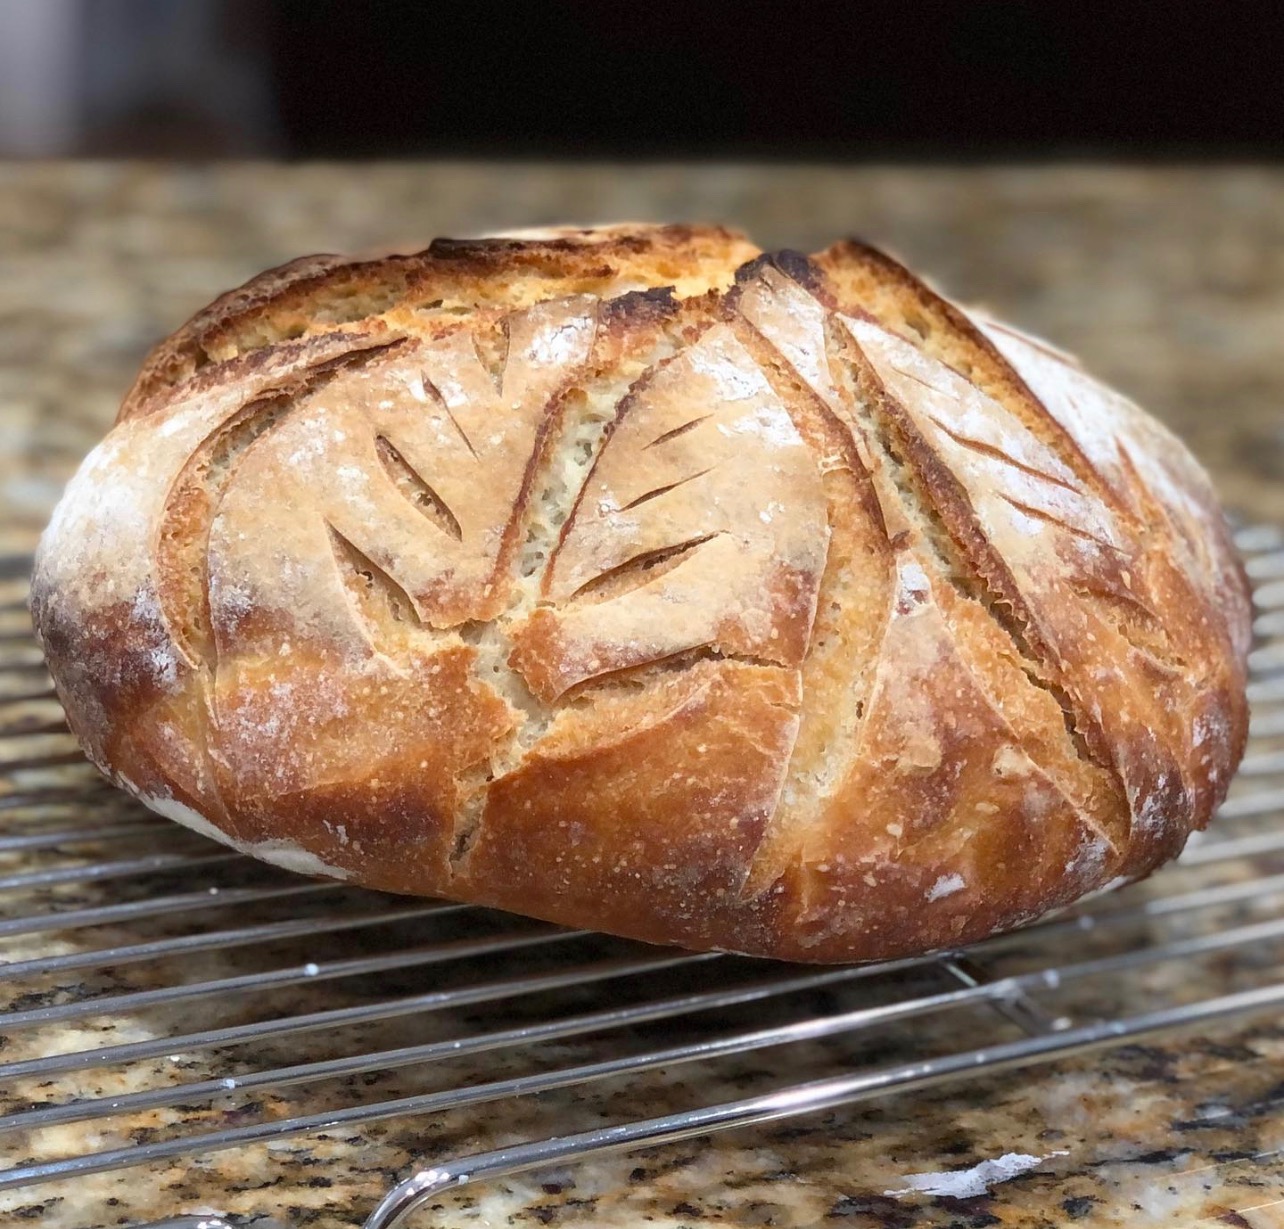 How to Bake Sourdough Bread in a Dutch Oven